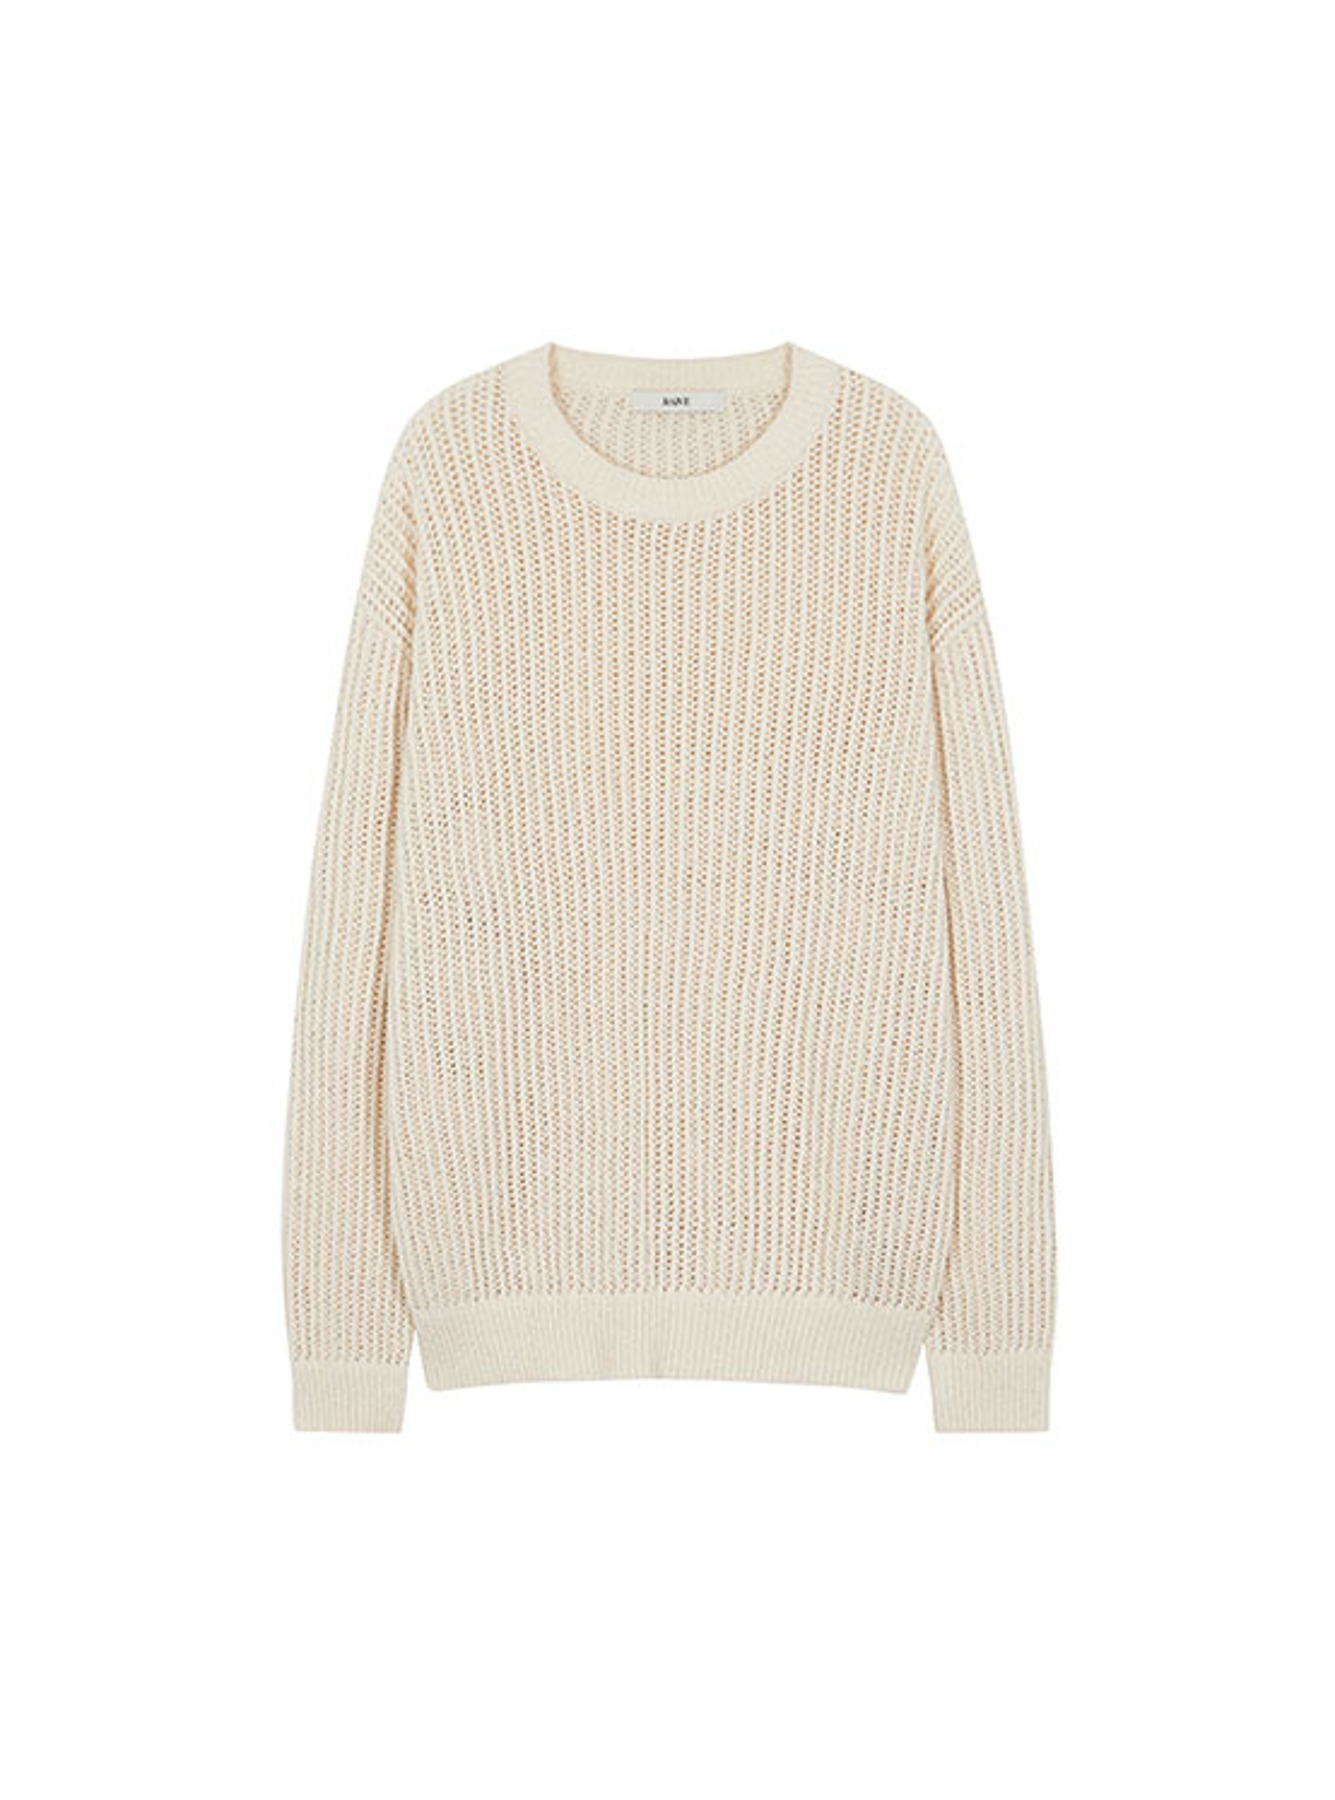 Over Fit Mesh Knit in Cream VK3MP901-9A